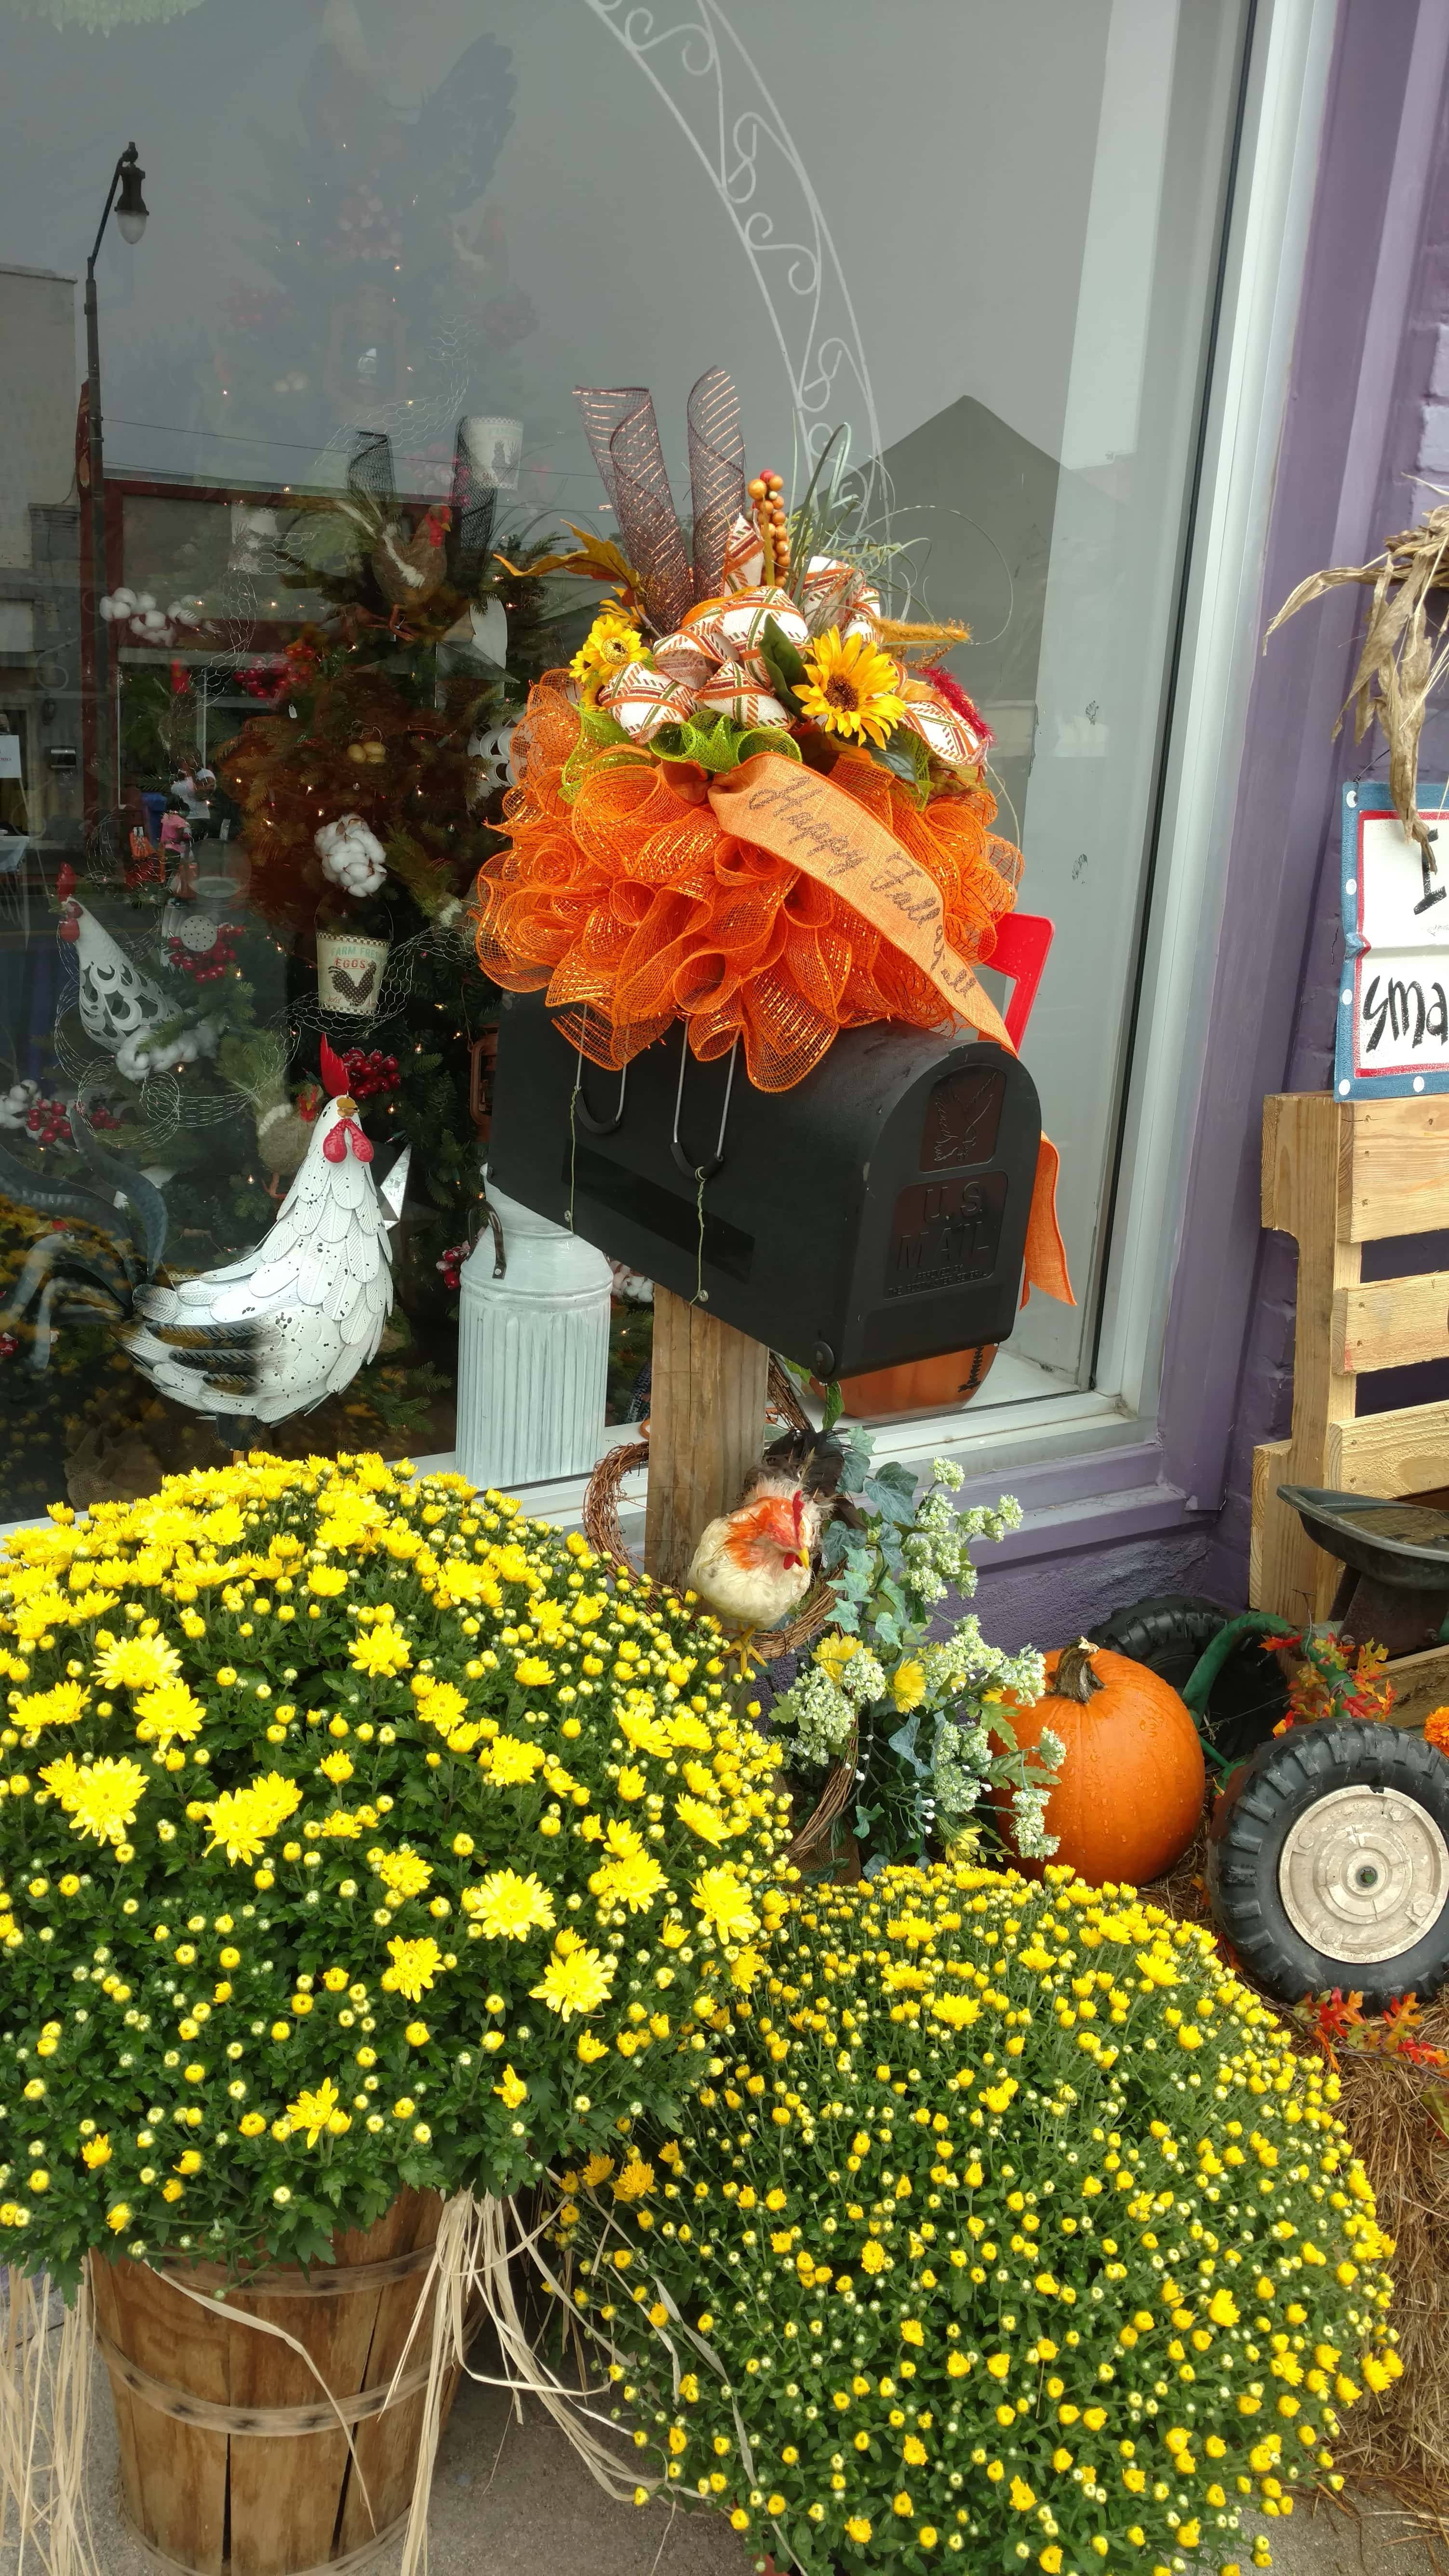 Abbey's Flowers & Gifts - Chesterfield, SC, US, blossom flower shop